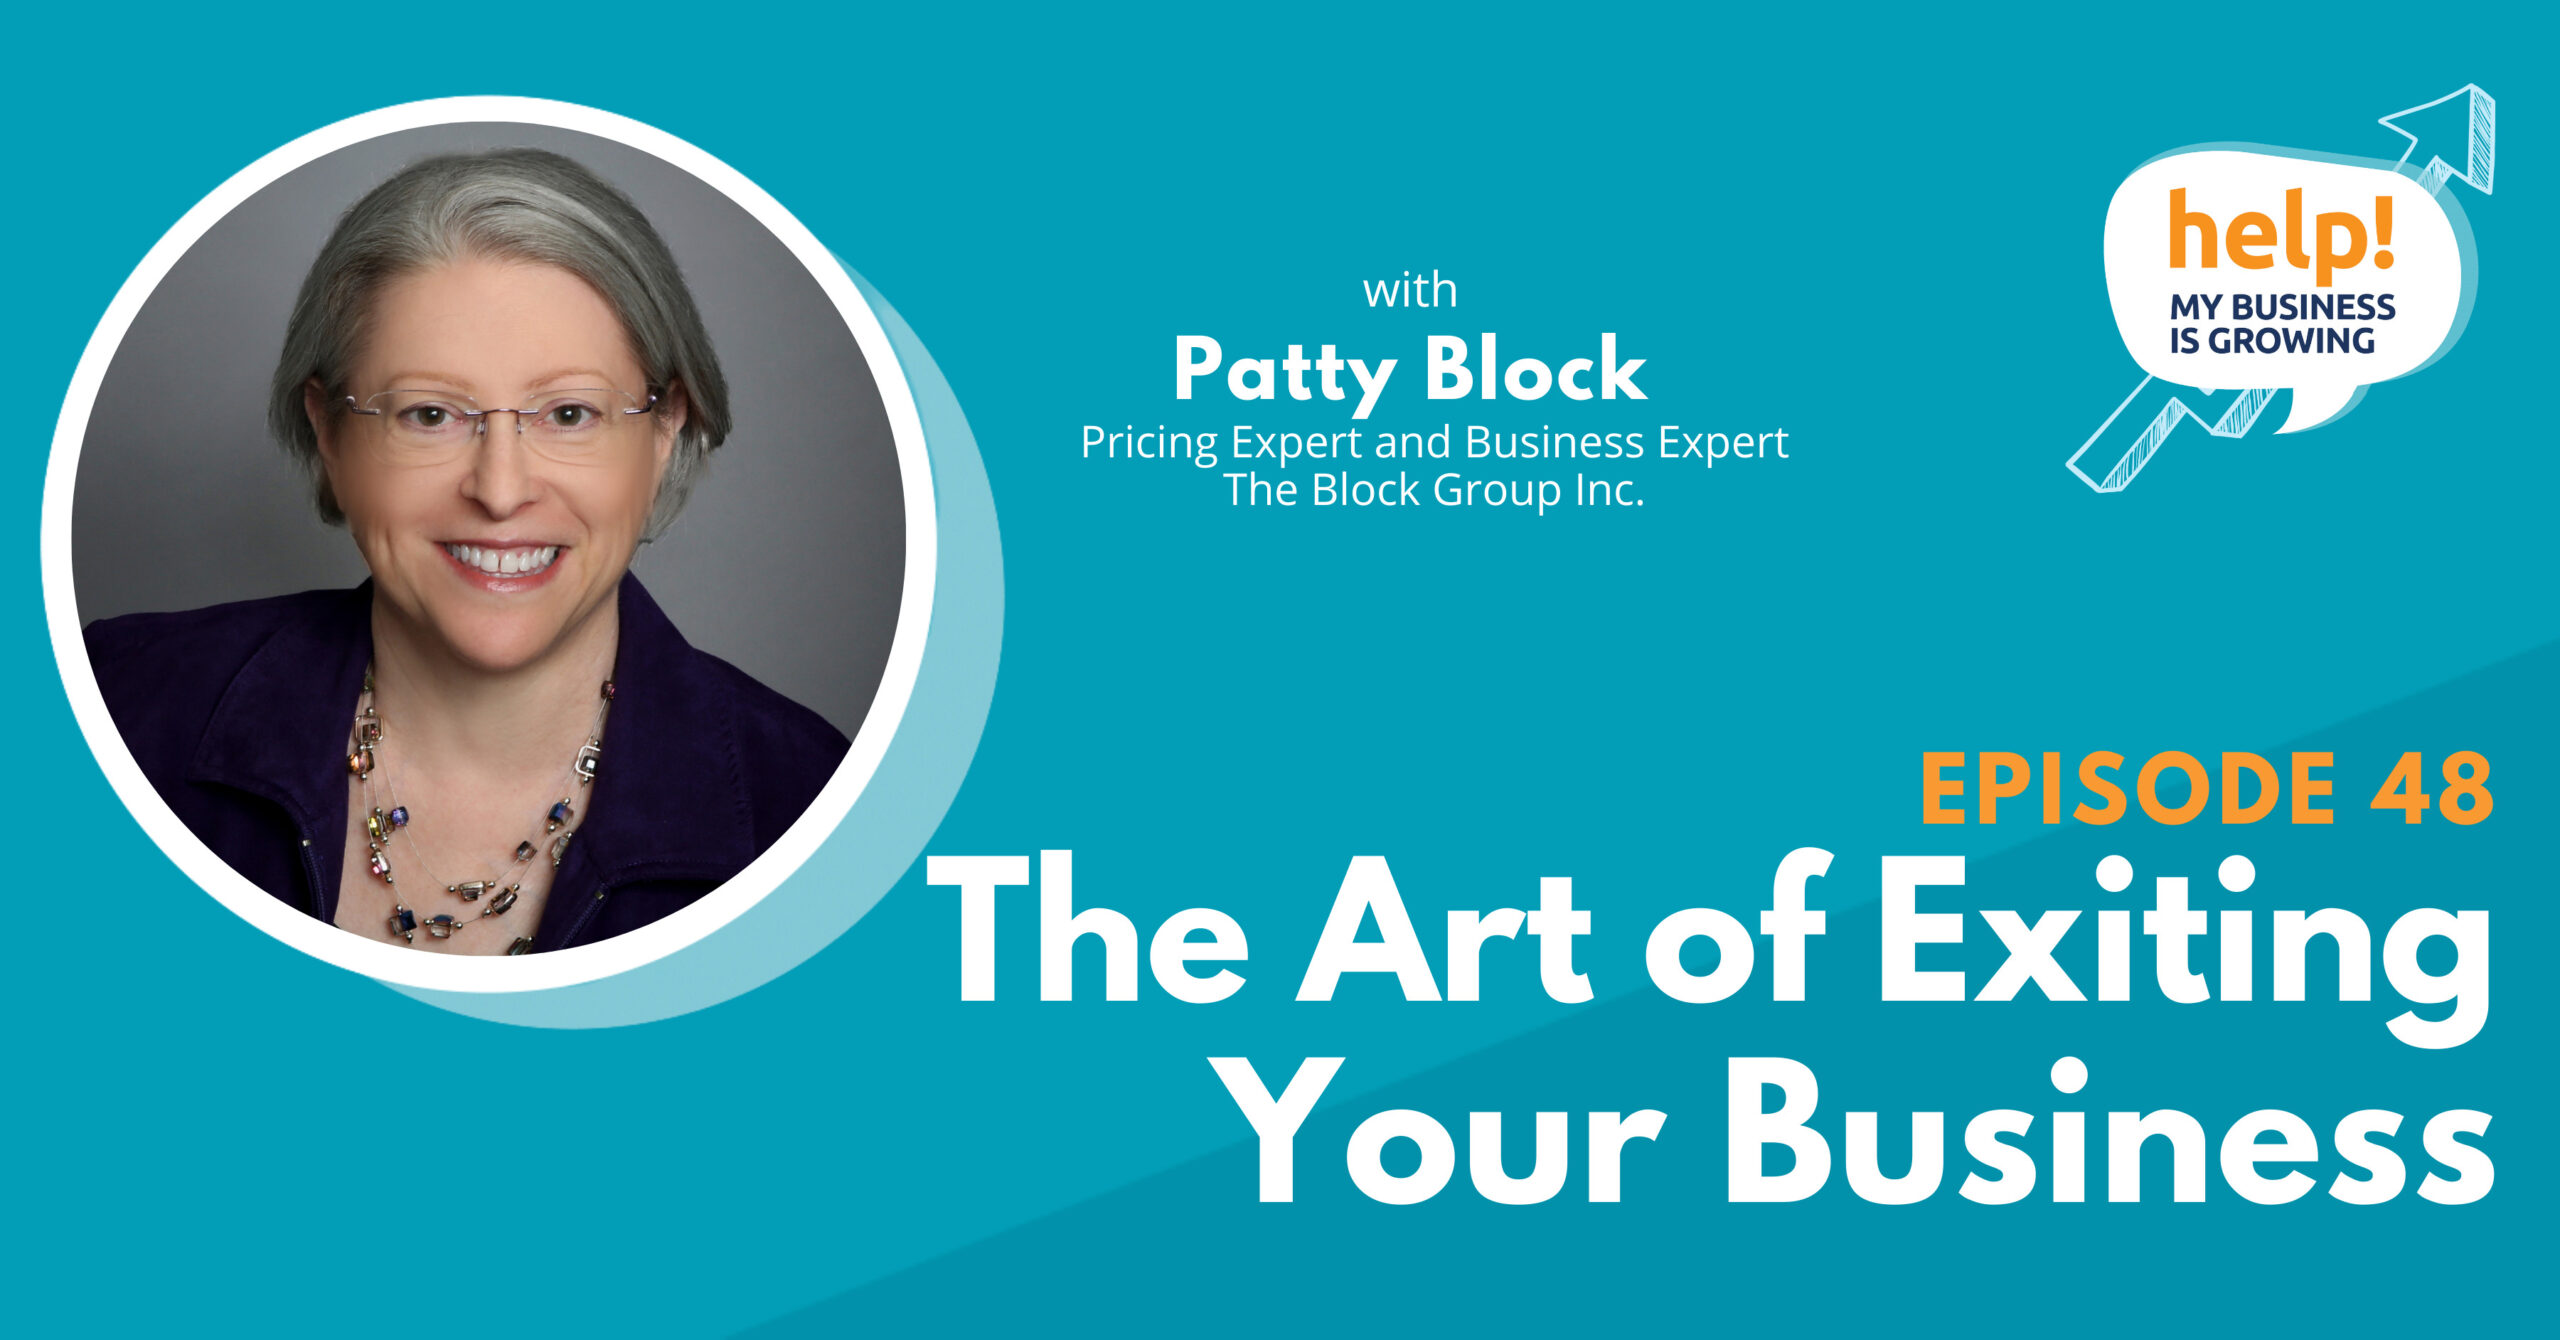 The Art of Exiting Your Business